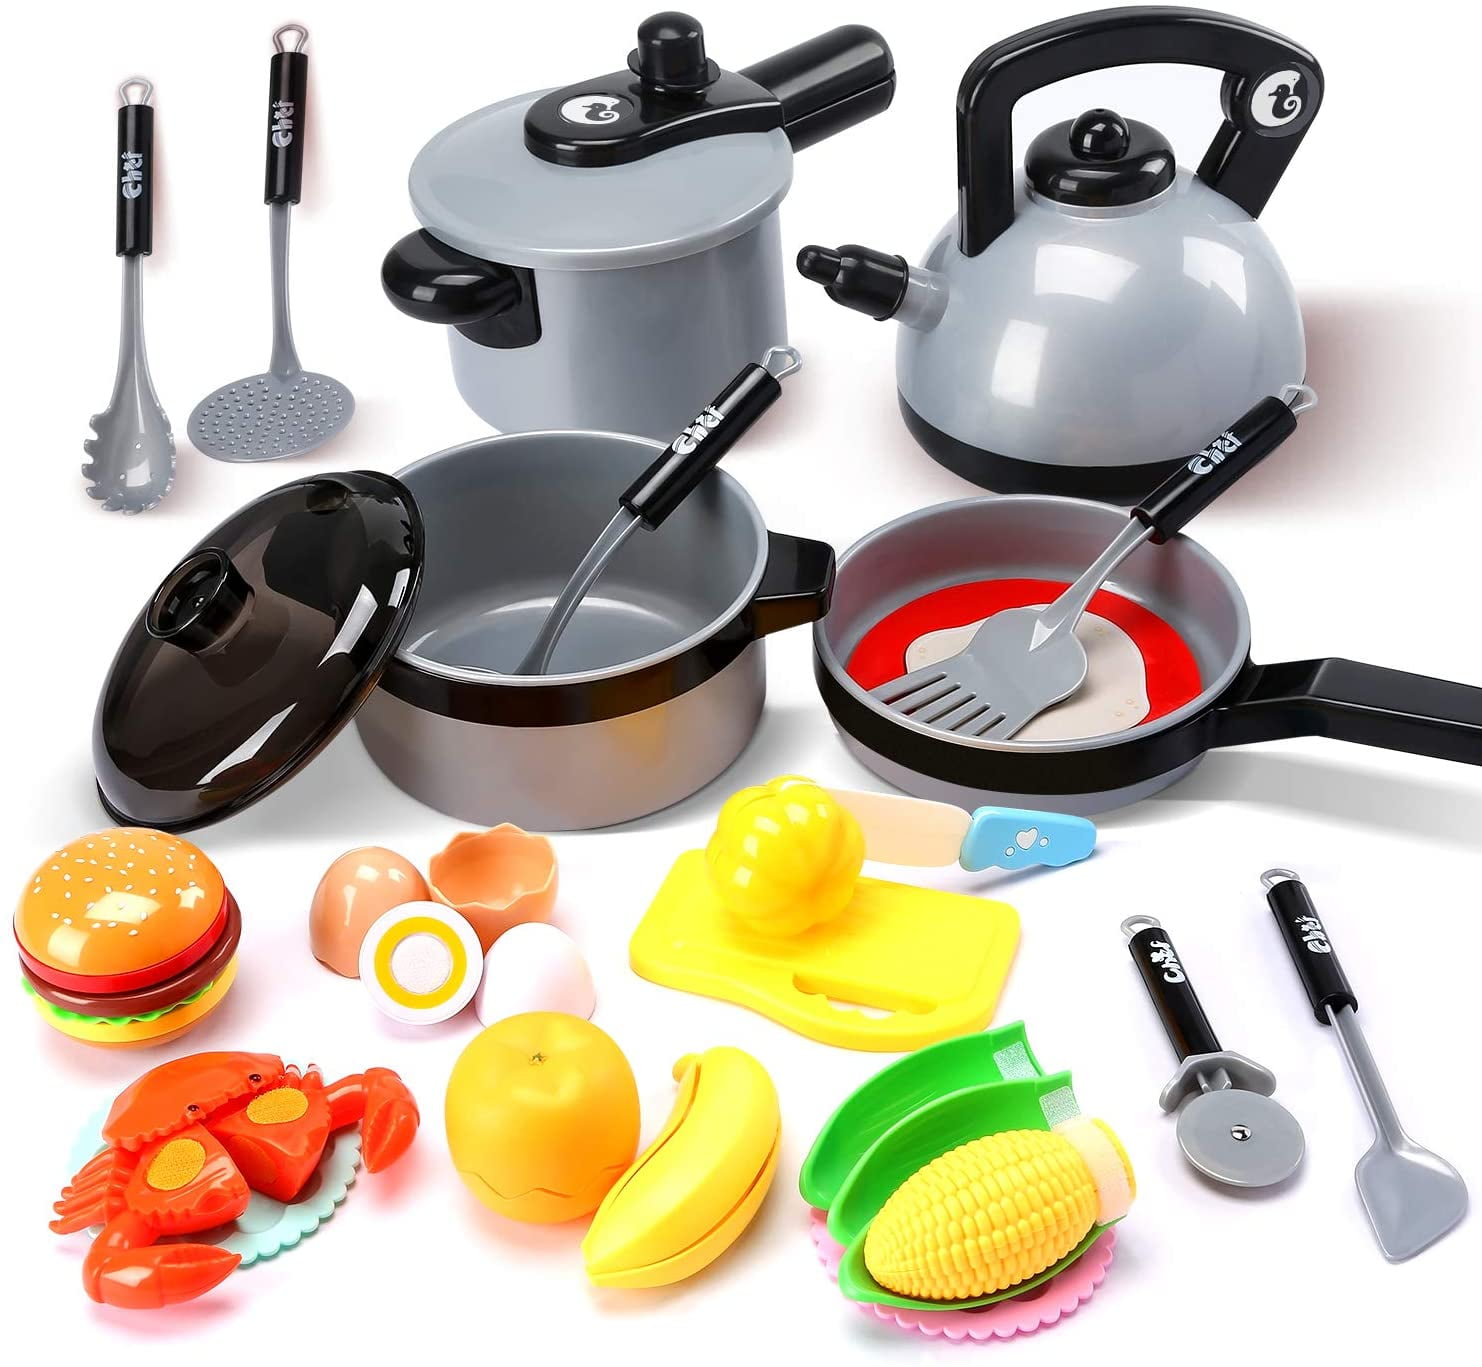 Cutting Vegetables & Fruit Cooking Toys with Stainless Steel cookware pots and Pans Set pingqian Kitchen Pretend Play Toys Cooking Utensils Accessories Apron & Chef Hat for Girls Boys 